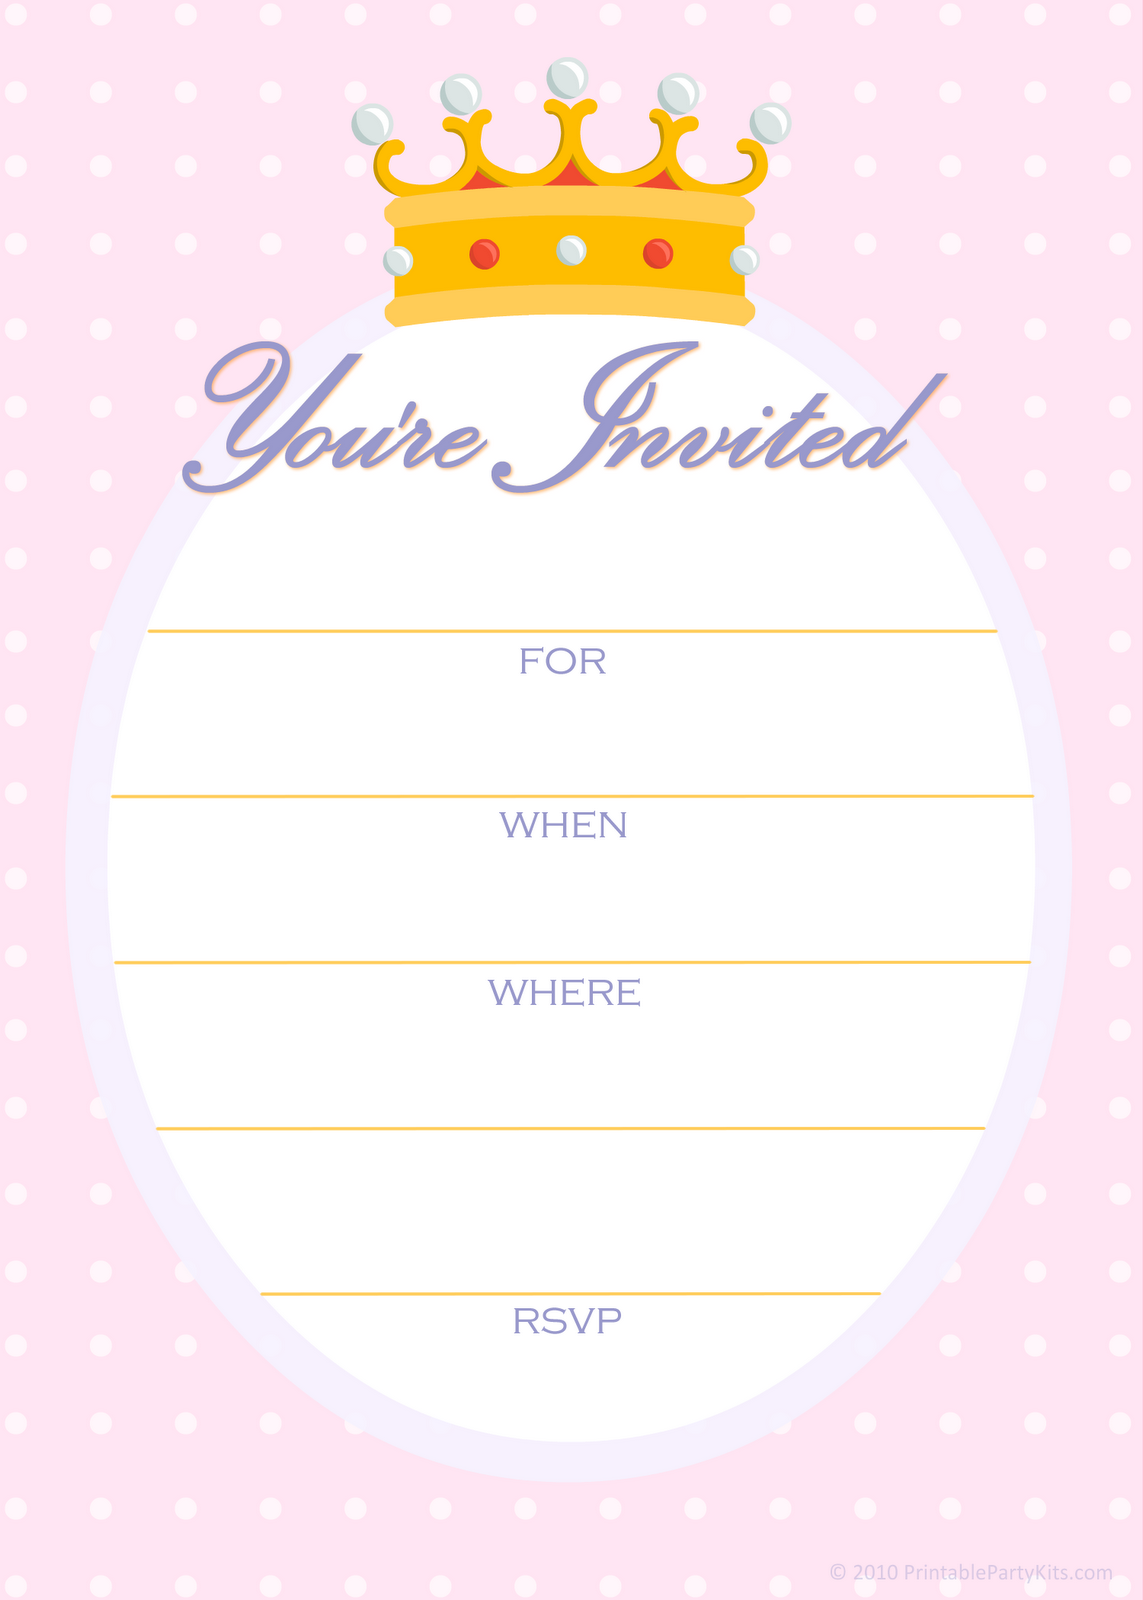 Free Printable Party Invitations April 2010